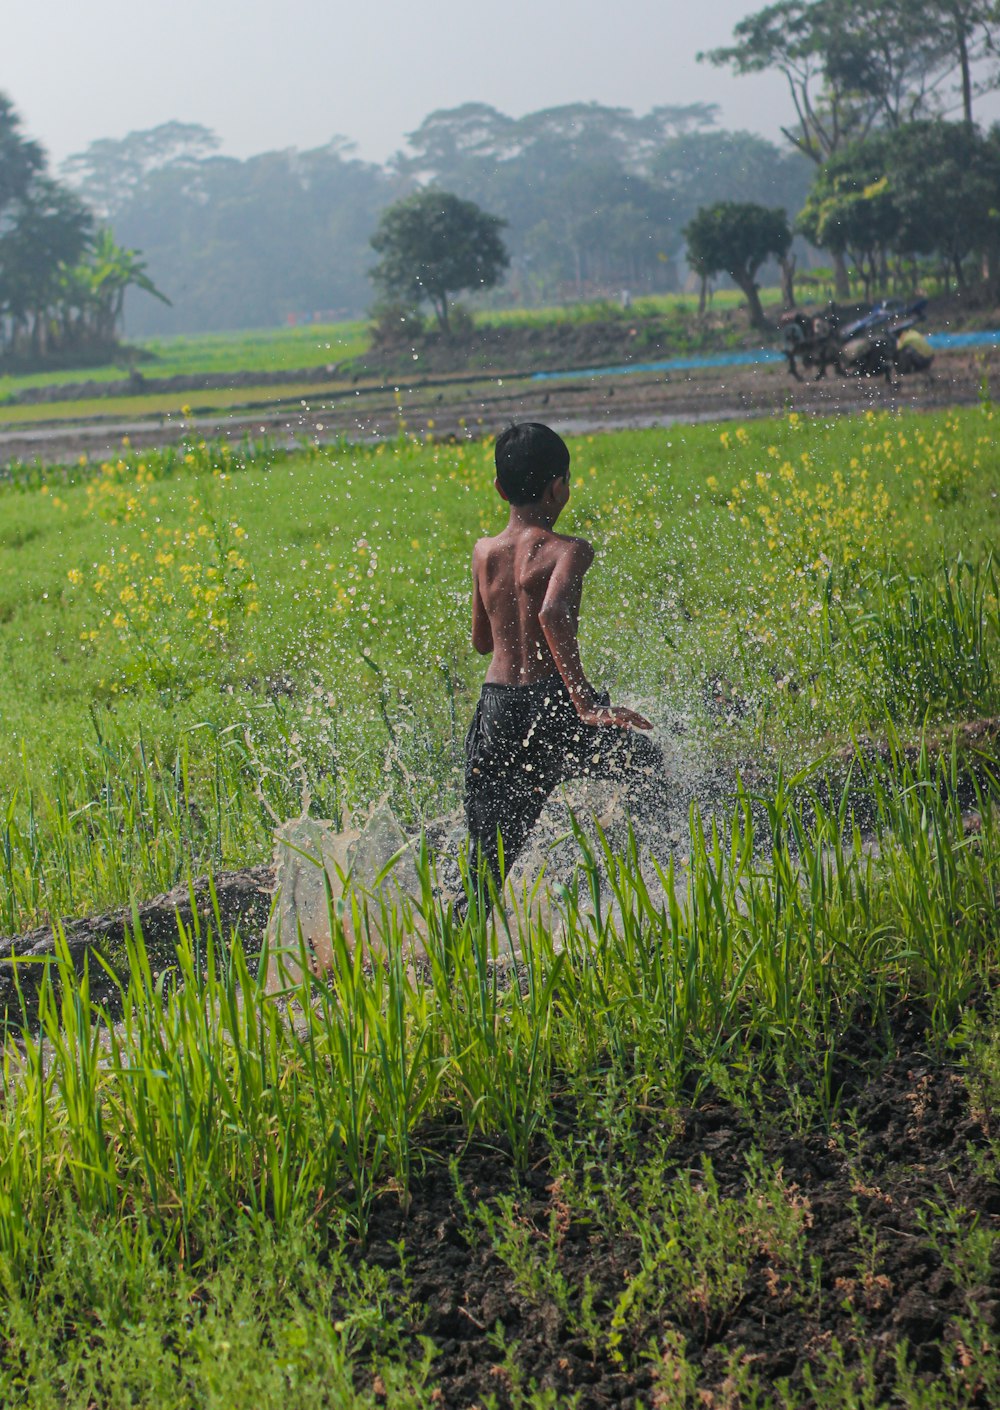 a young boy splashes water on his body in a field